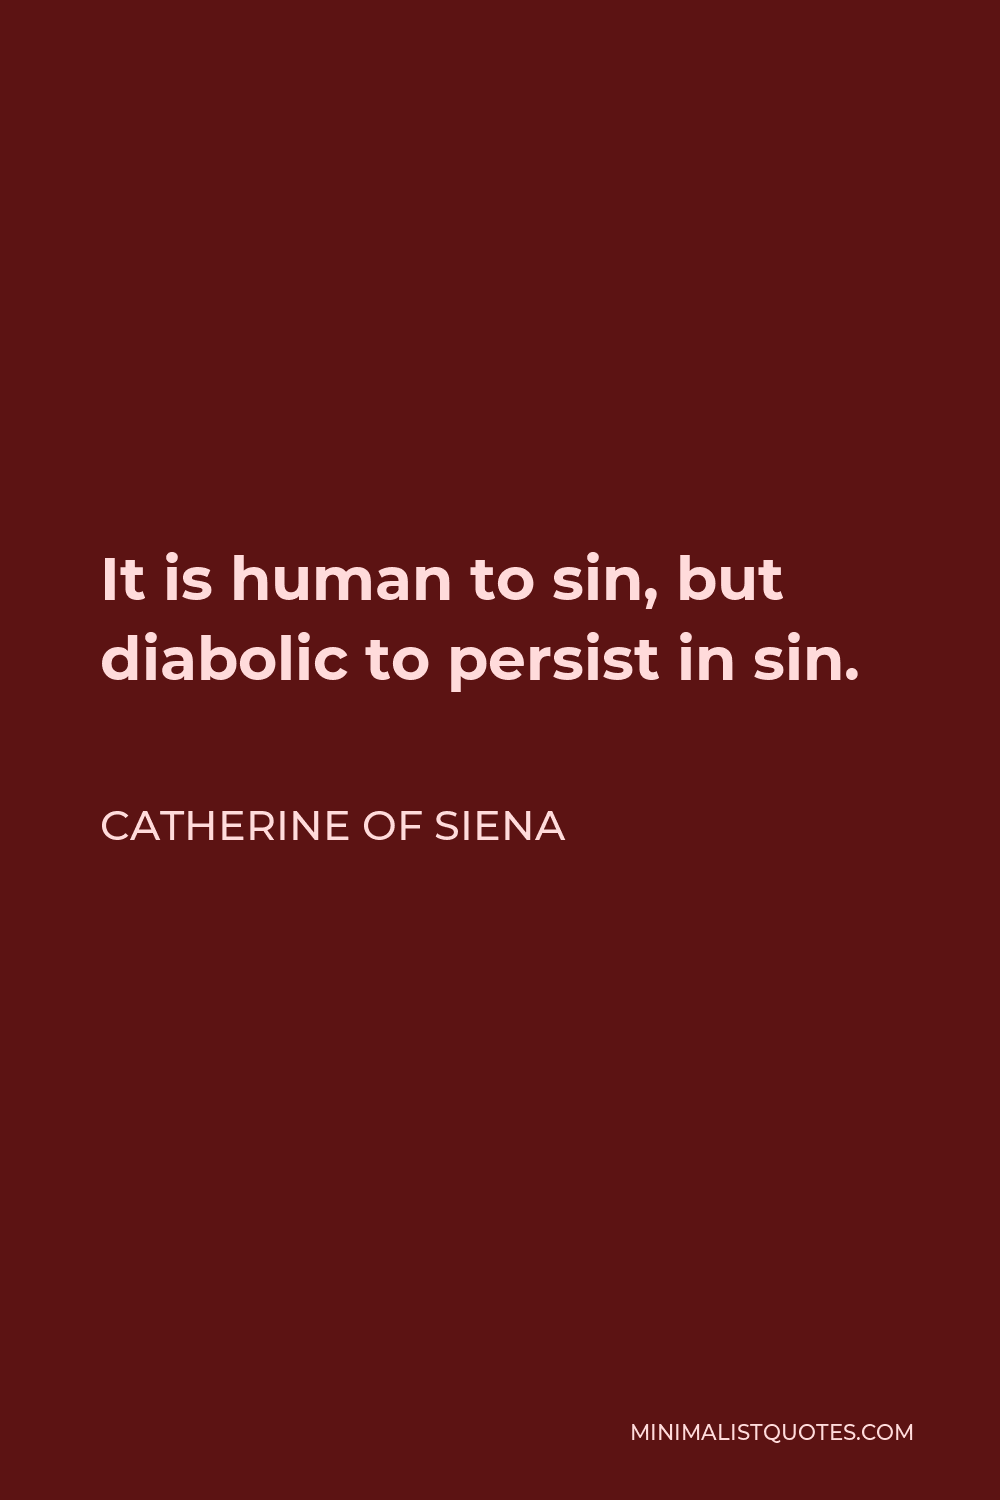 Catherine of Siena Quote - It is human to sin, but diabolic to persist in sin.